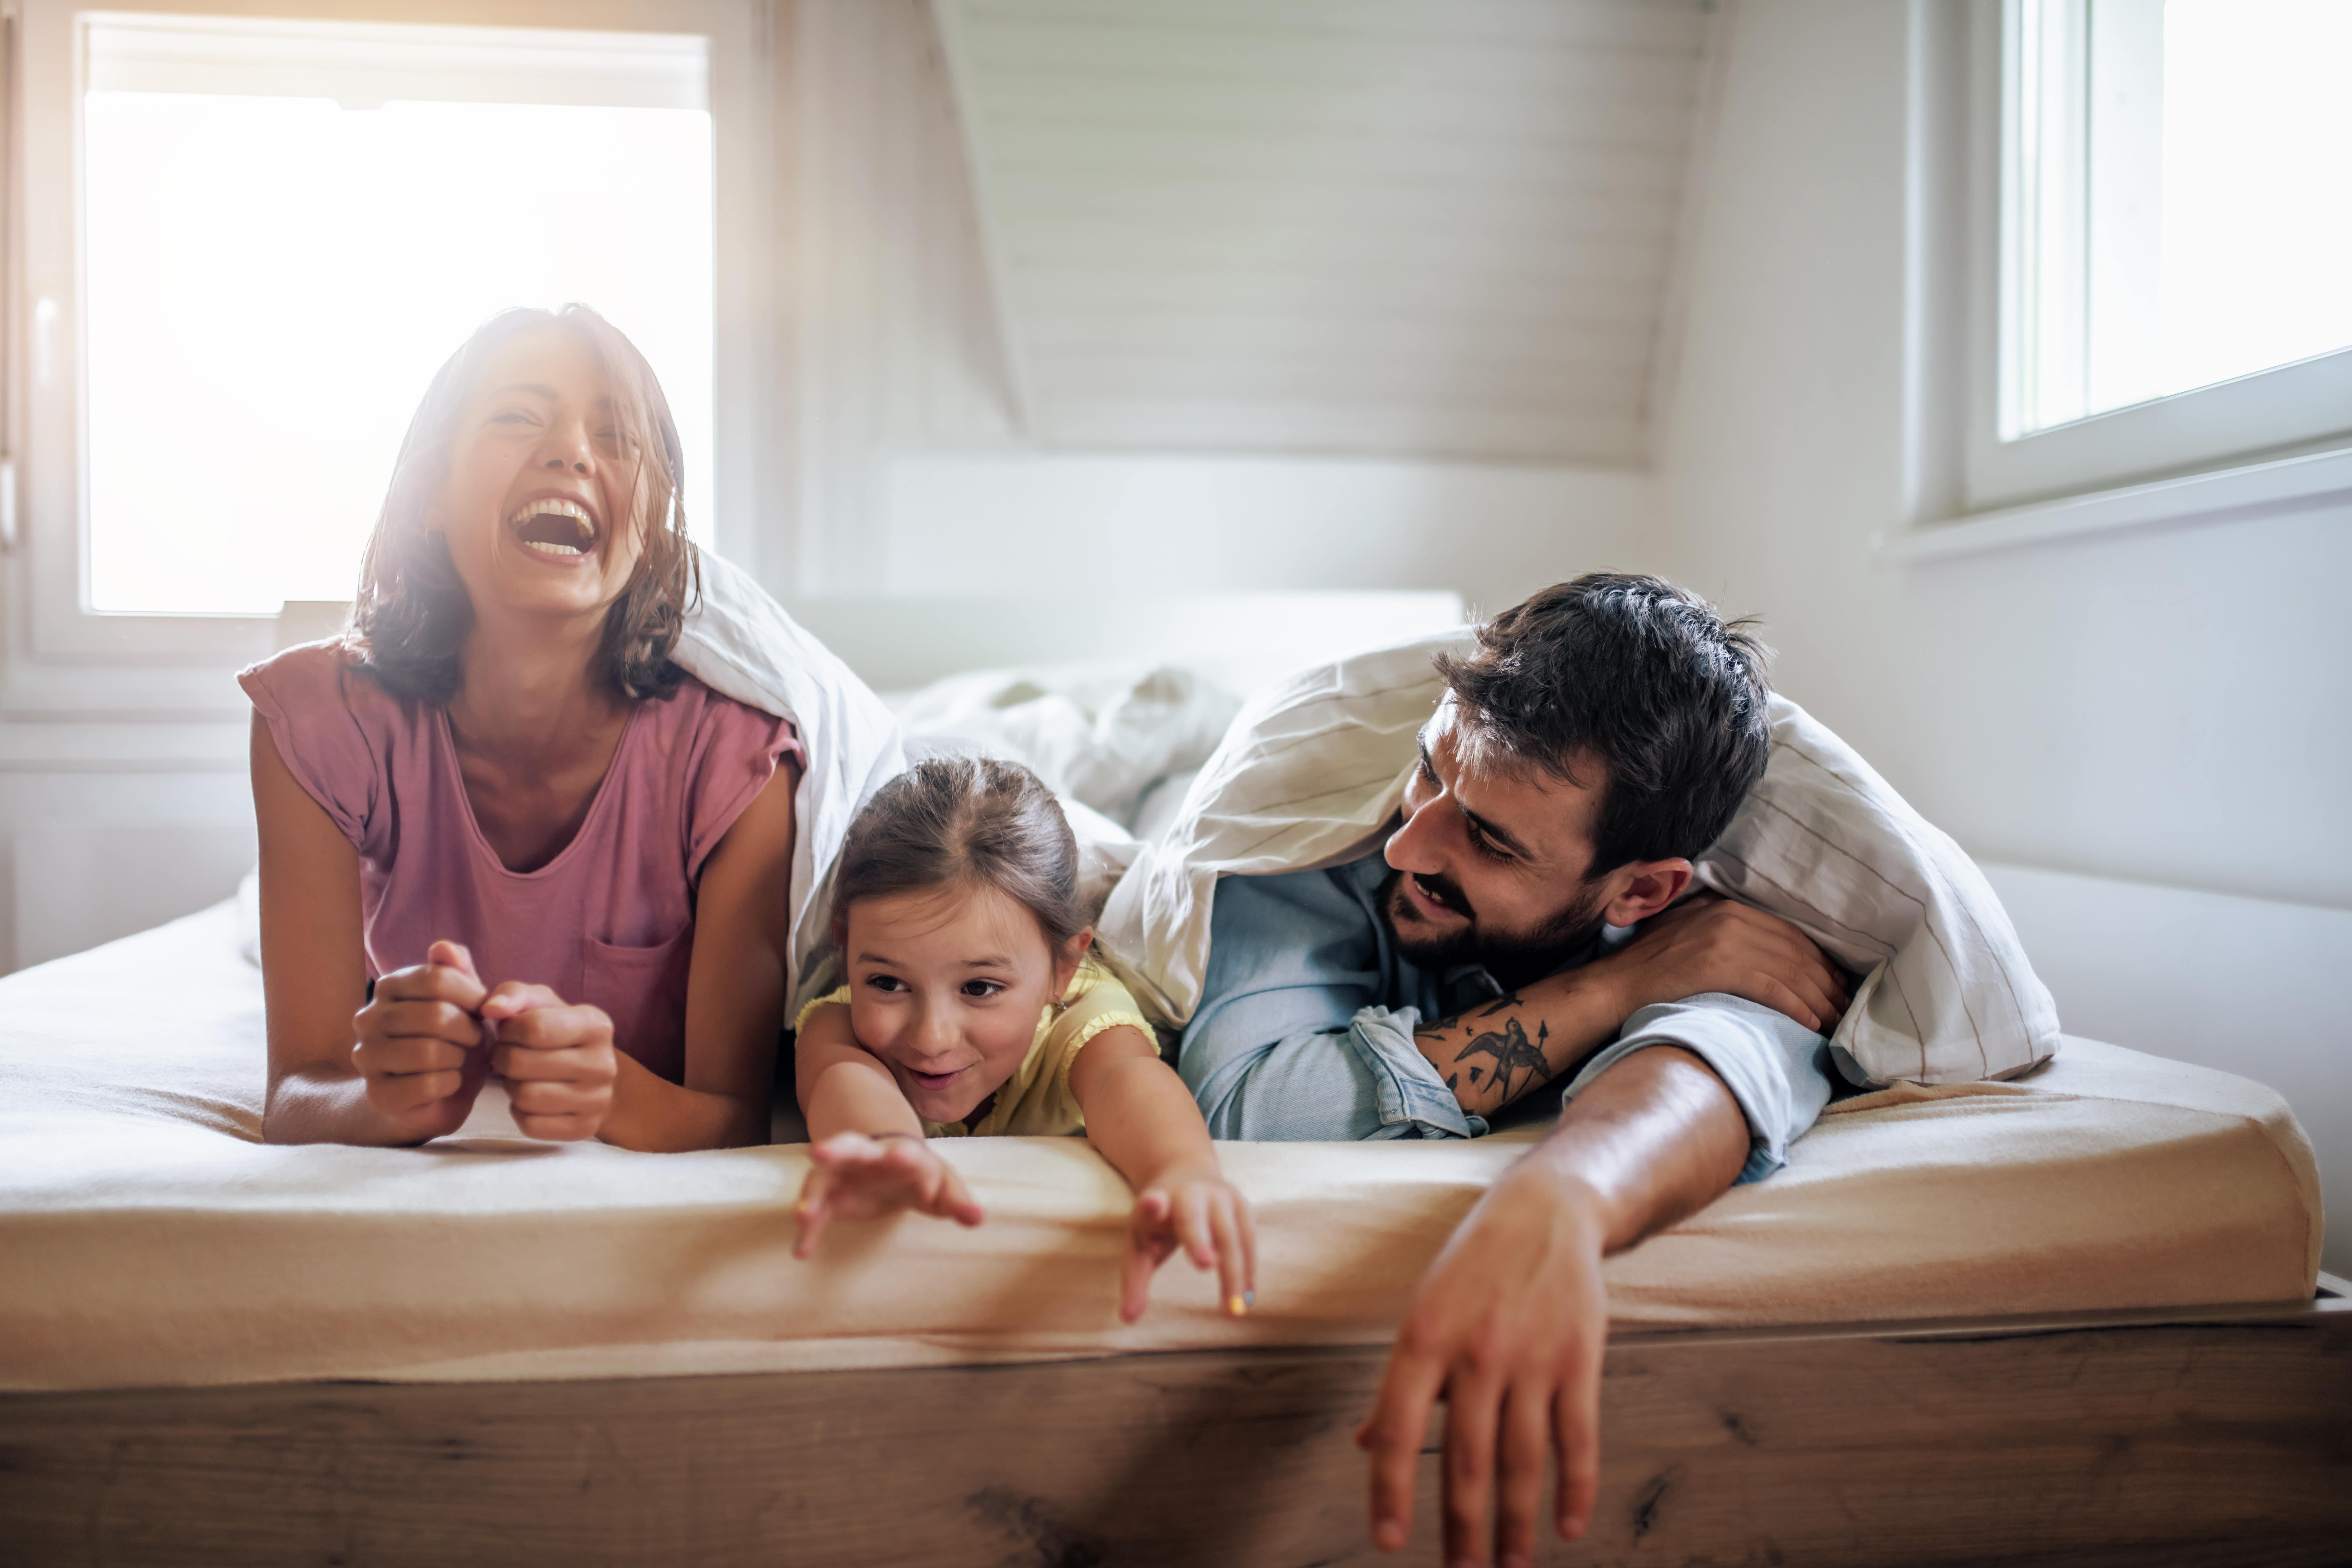 A family of three on a mattress smiling and having fun under the duvet.